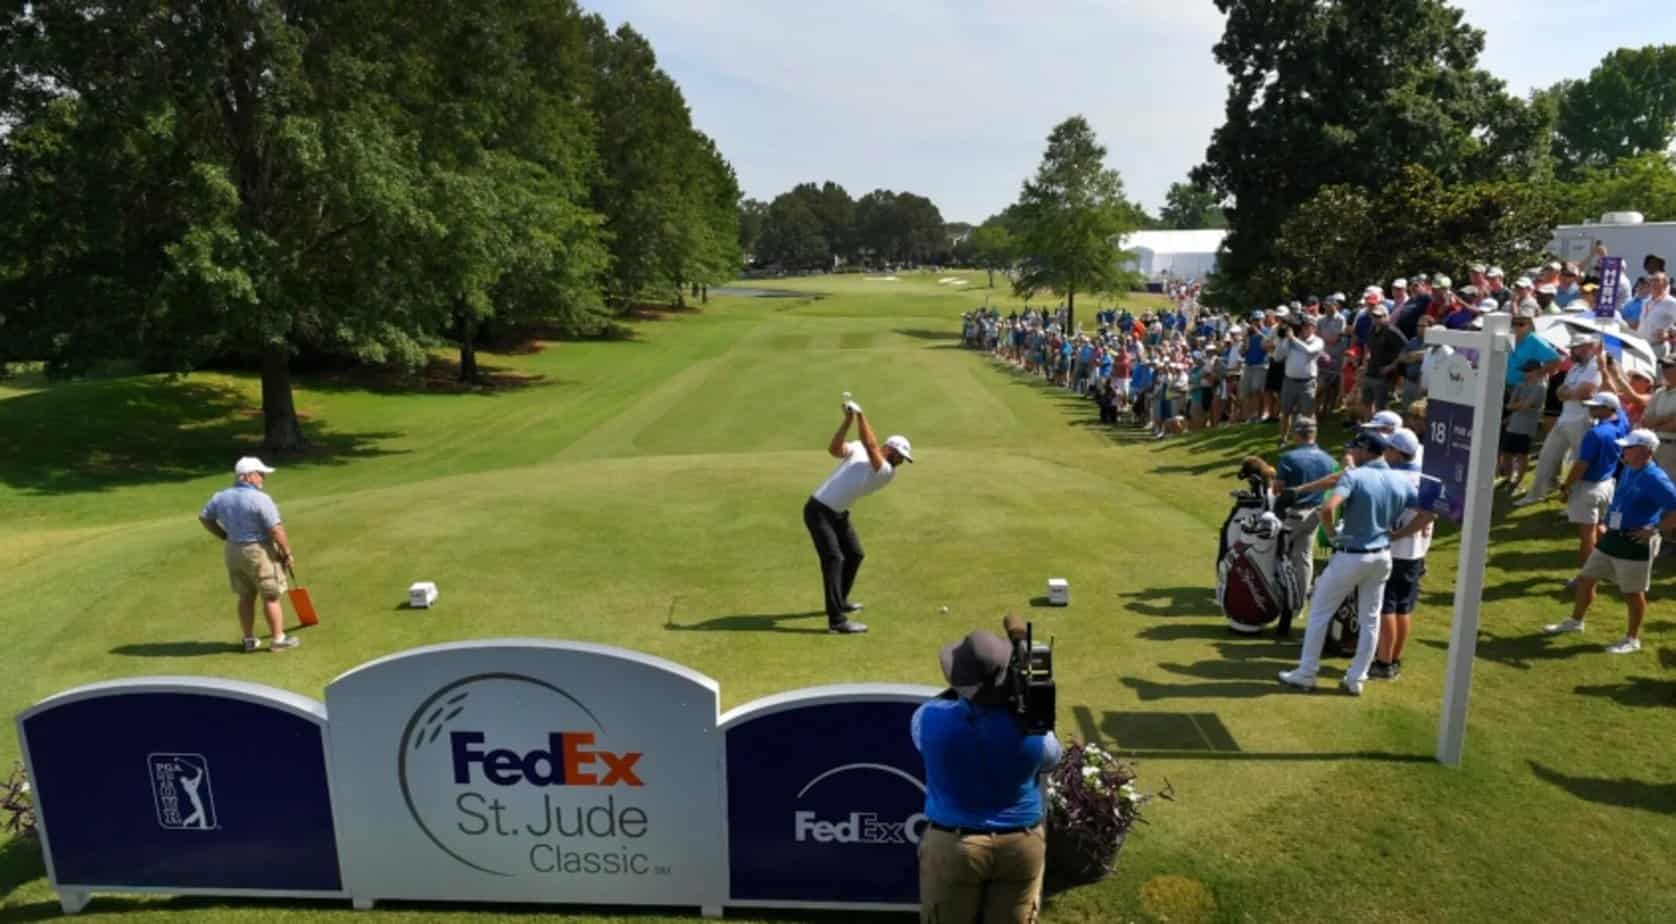 FedEx St. Jude Championship – Event Preview